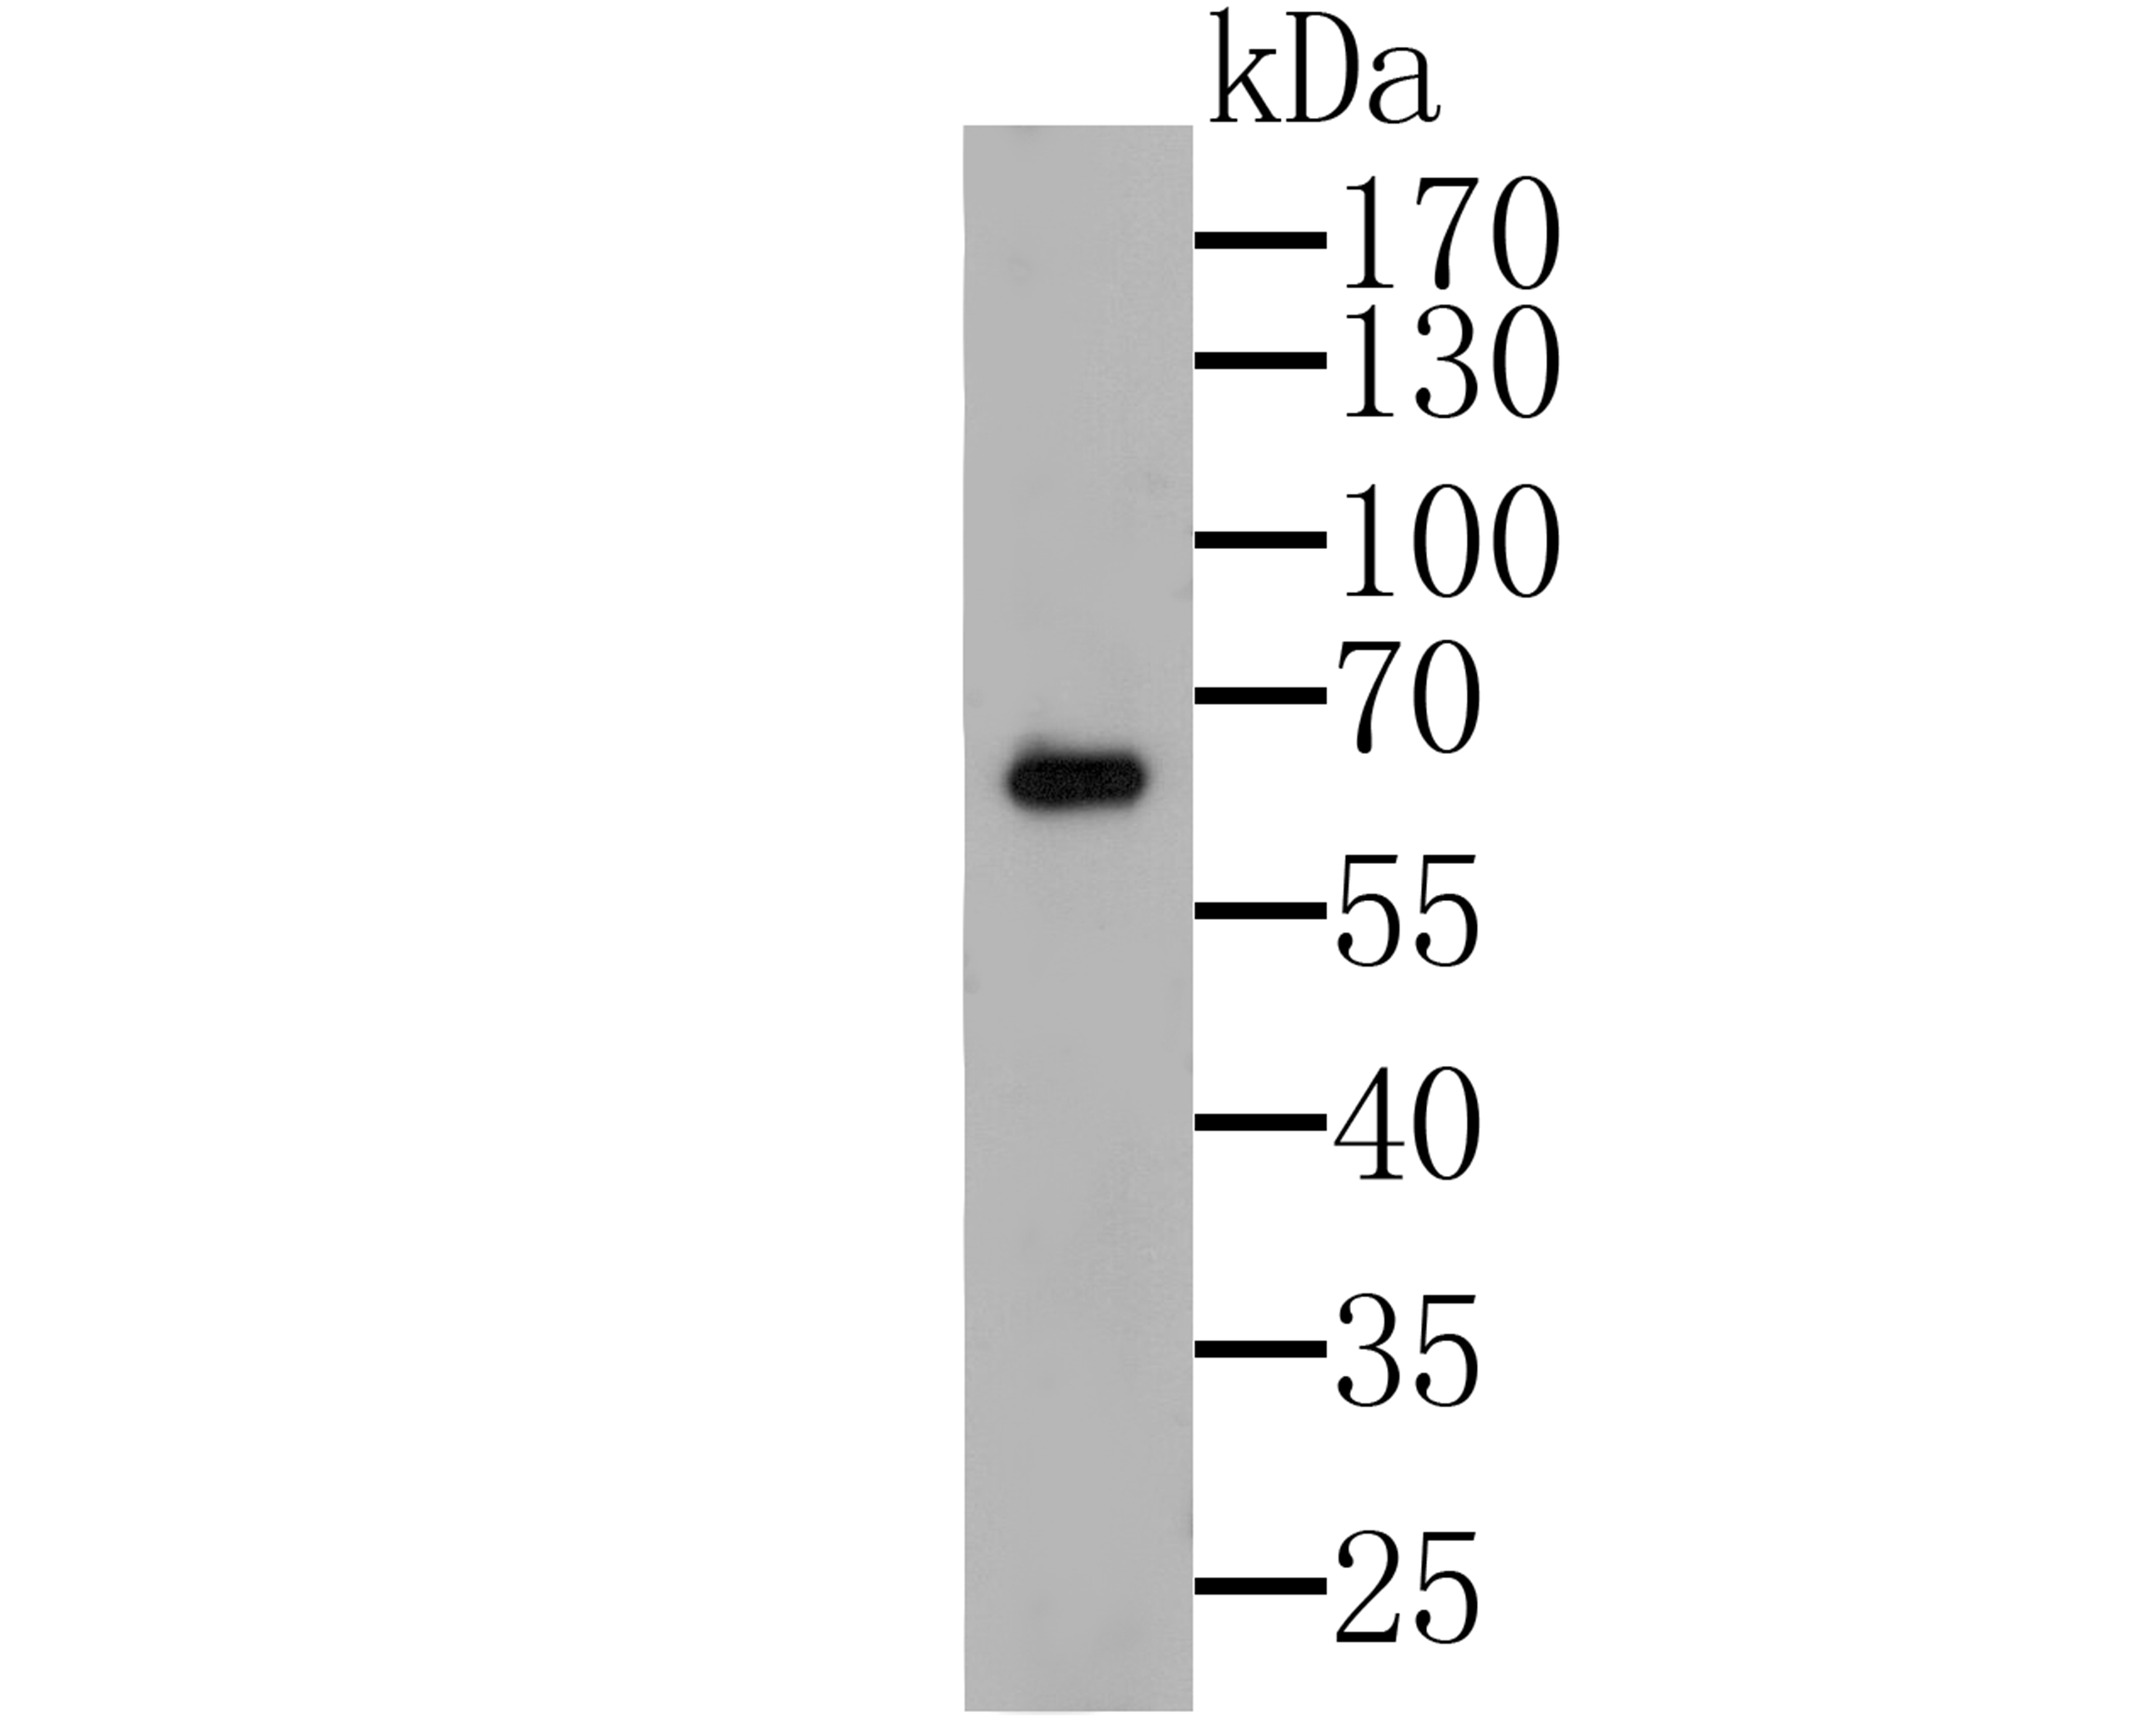 Western blot analysis of G-protein coupled receptor 30 on Lovo cell lysate. Proteins were transferred to a PVDF membrane and blocked with 5% BSA in PBS for 1 hour at room temperature. The primary antibody was used at a 1:500 dilution in 5% BSA at room temperature for 2 hours. Goat Anti-Rabbit IgG - HRP Secondary Antibody (HA1001) at 1:5,000 dilution was used for 1 hour at room temperature.